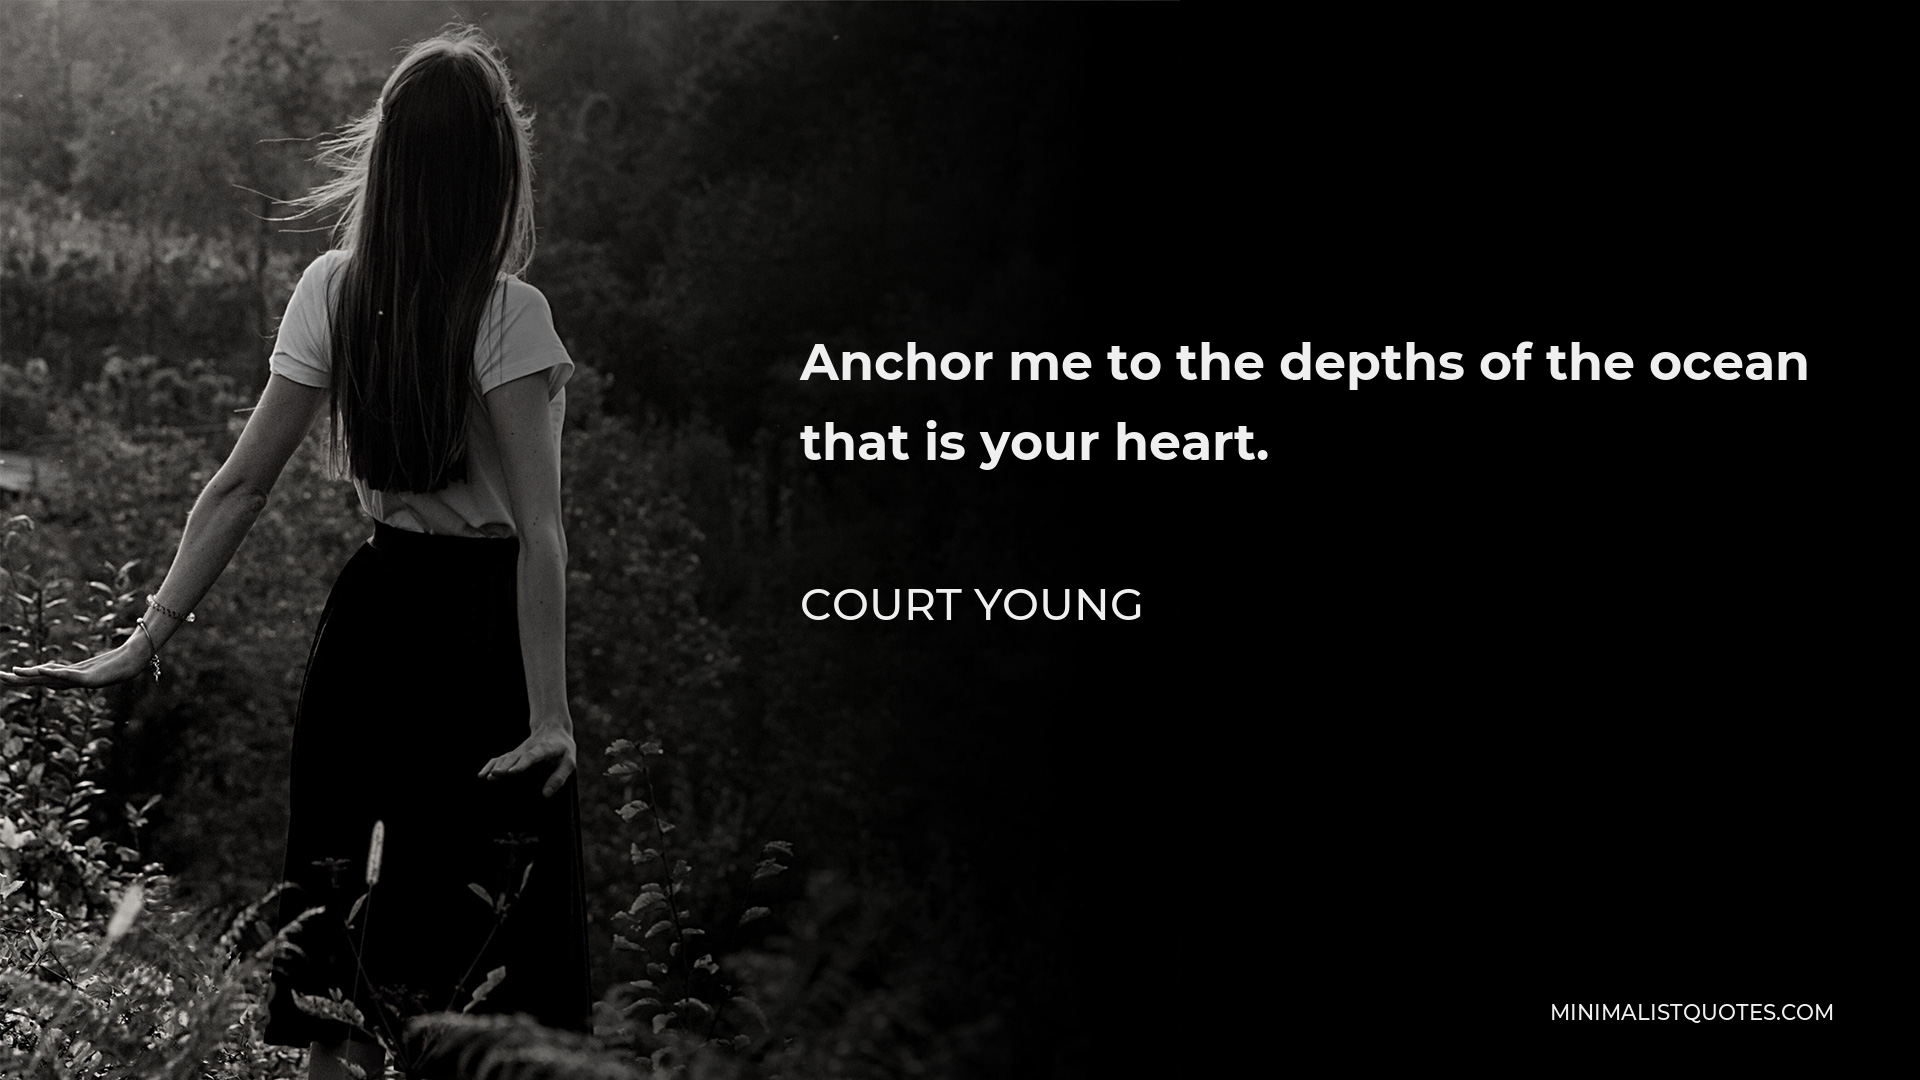 Court Young Quote - Anchor me to the depths of the ocean that is your heart.